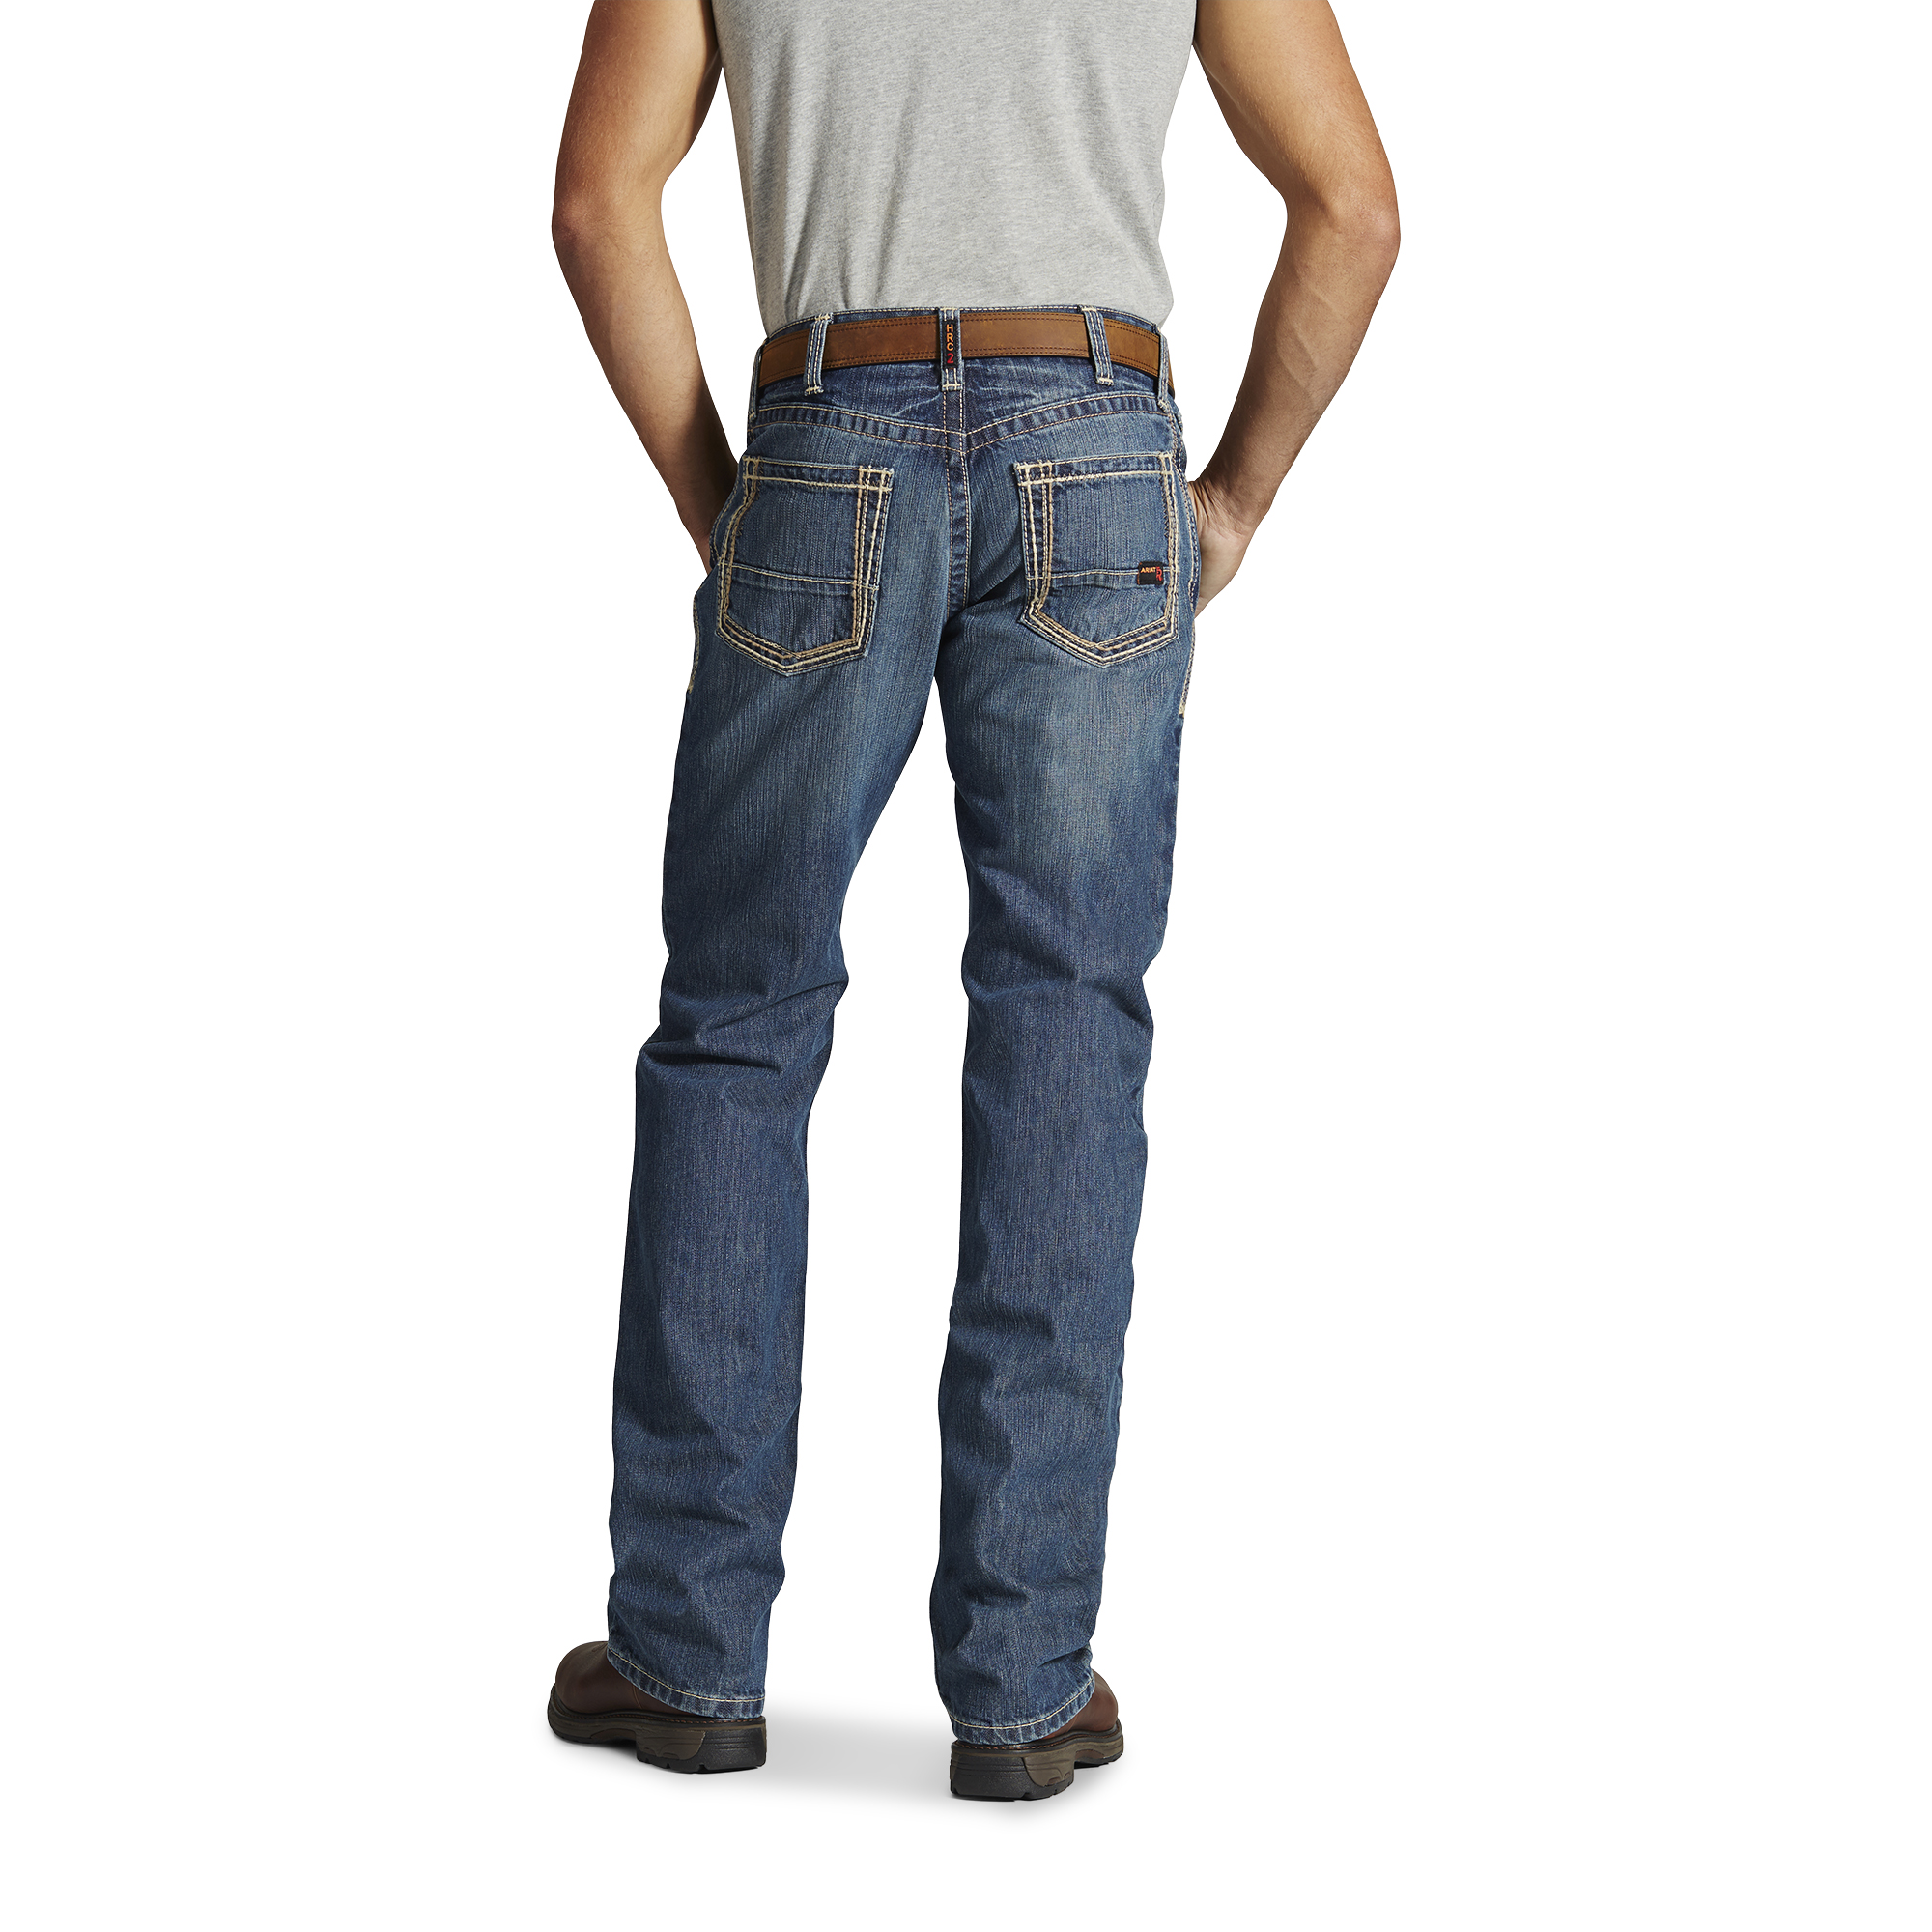 Ariat FR Jeans Archives - Mettry